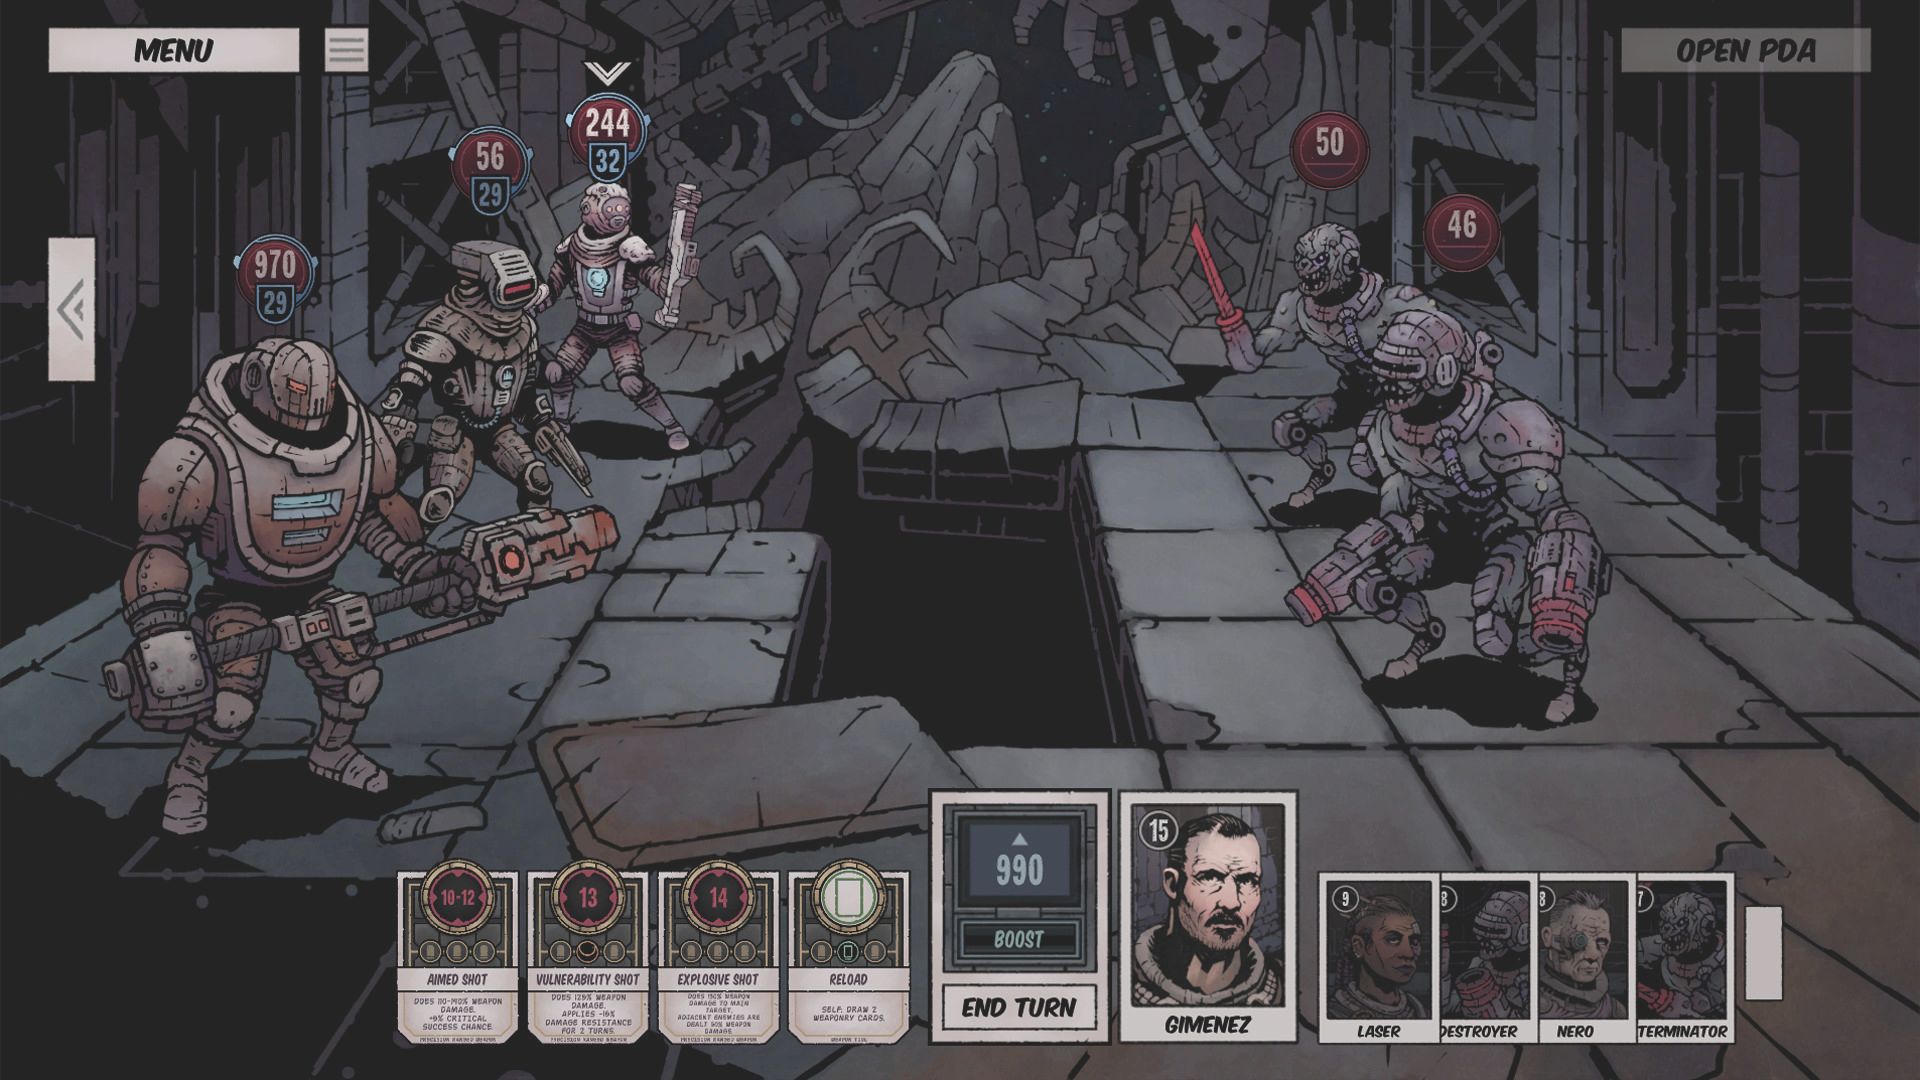 Free games: Win a Steam key for gritty comic-book style RPG Deep Sky Derelicts!